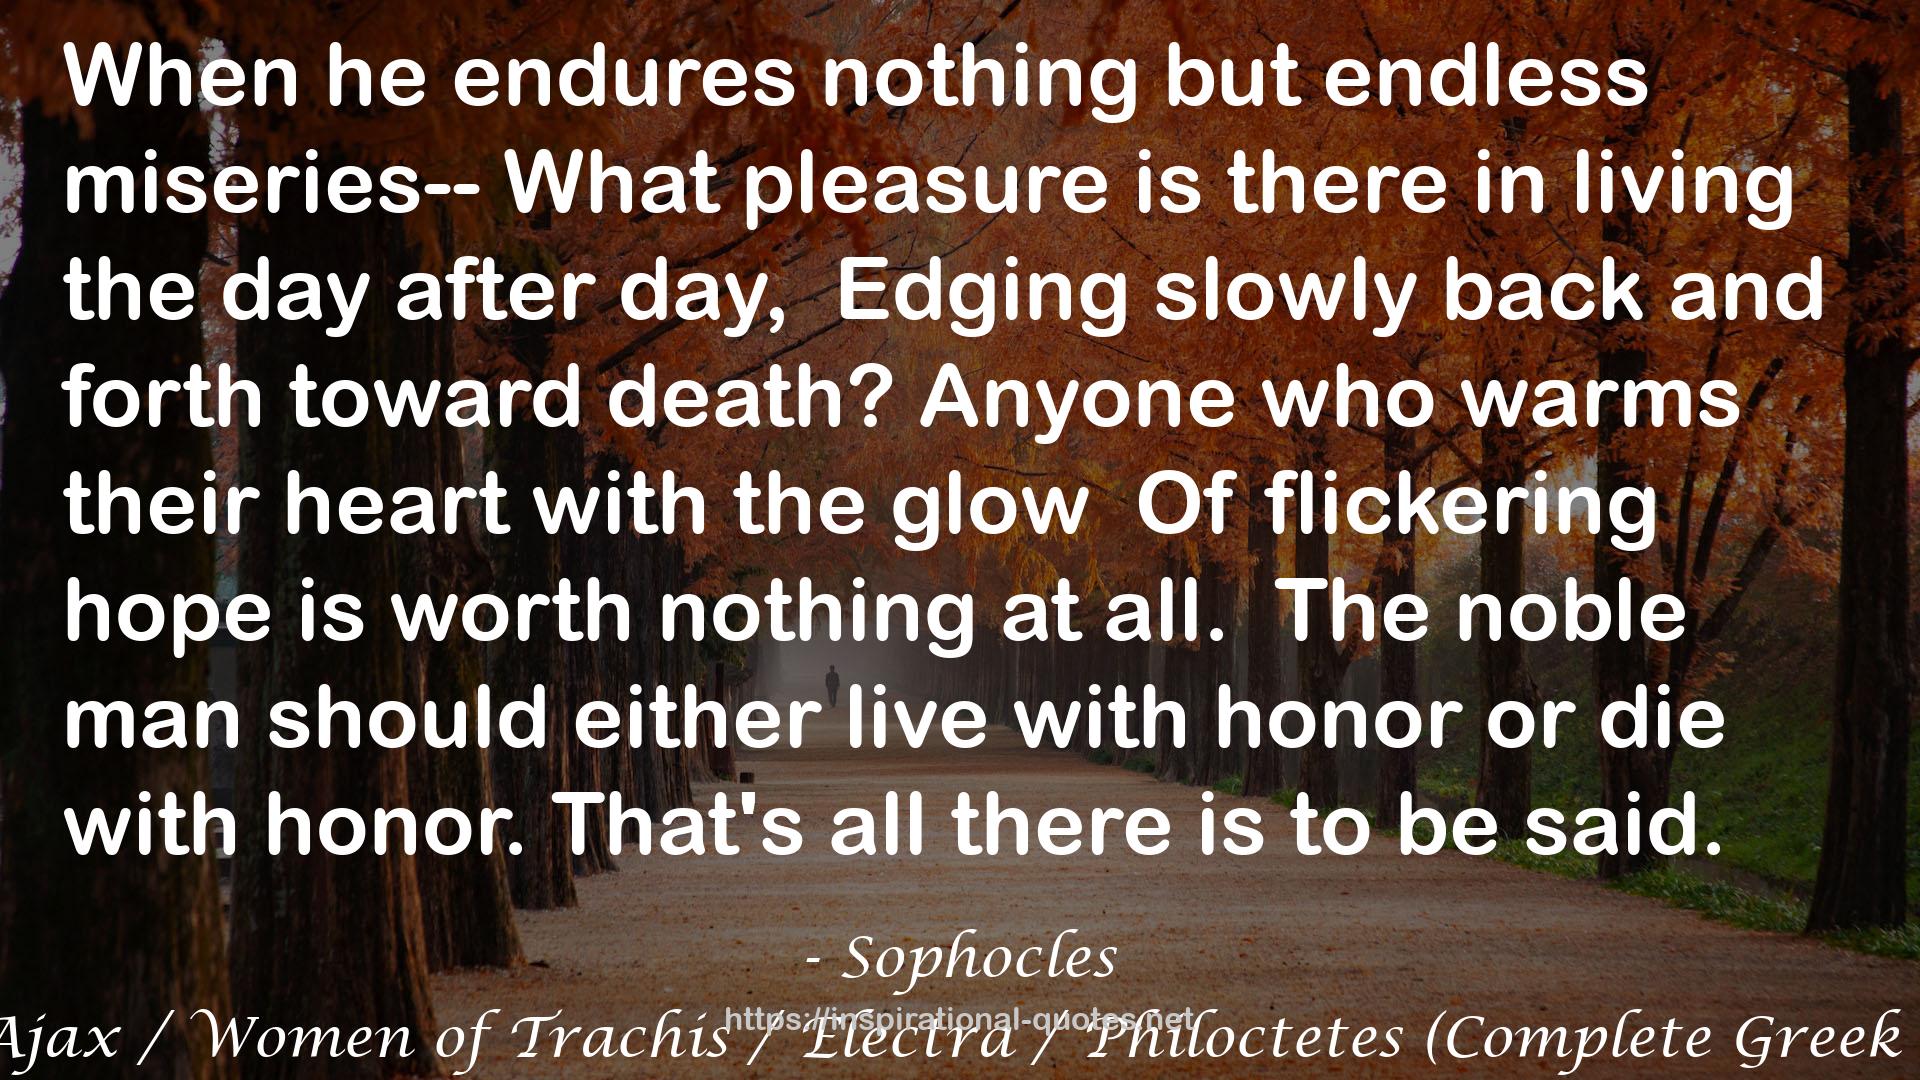 Sophocles II: Ajax / Women of Trachis / Electra / Philoctetes (Complete Greek Tragedies, #4) QUOTES